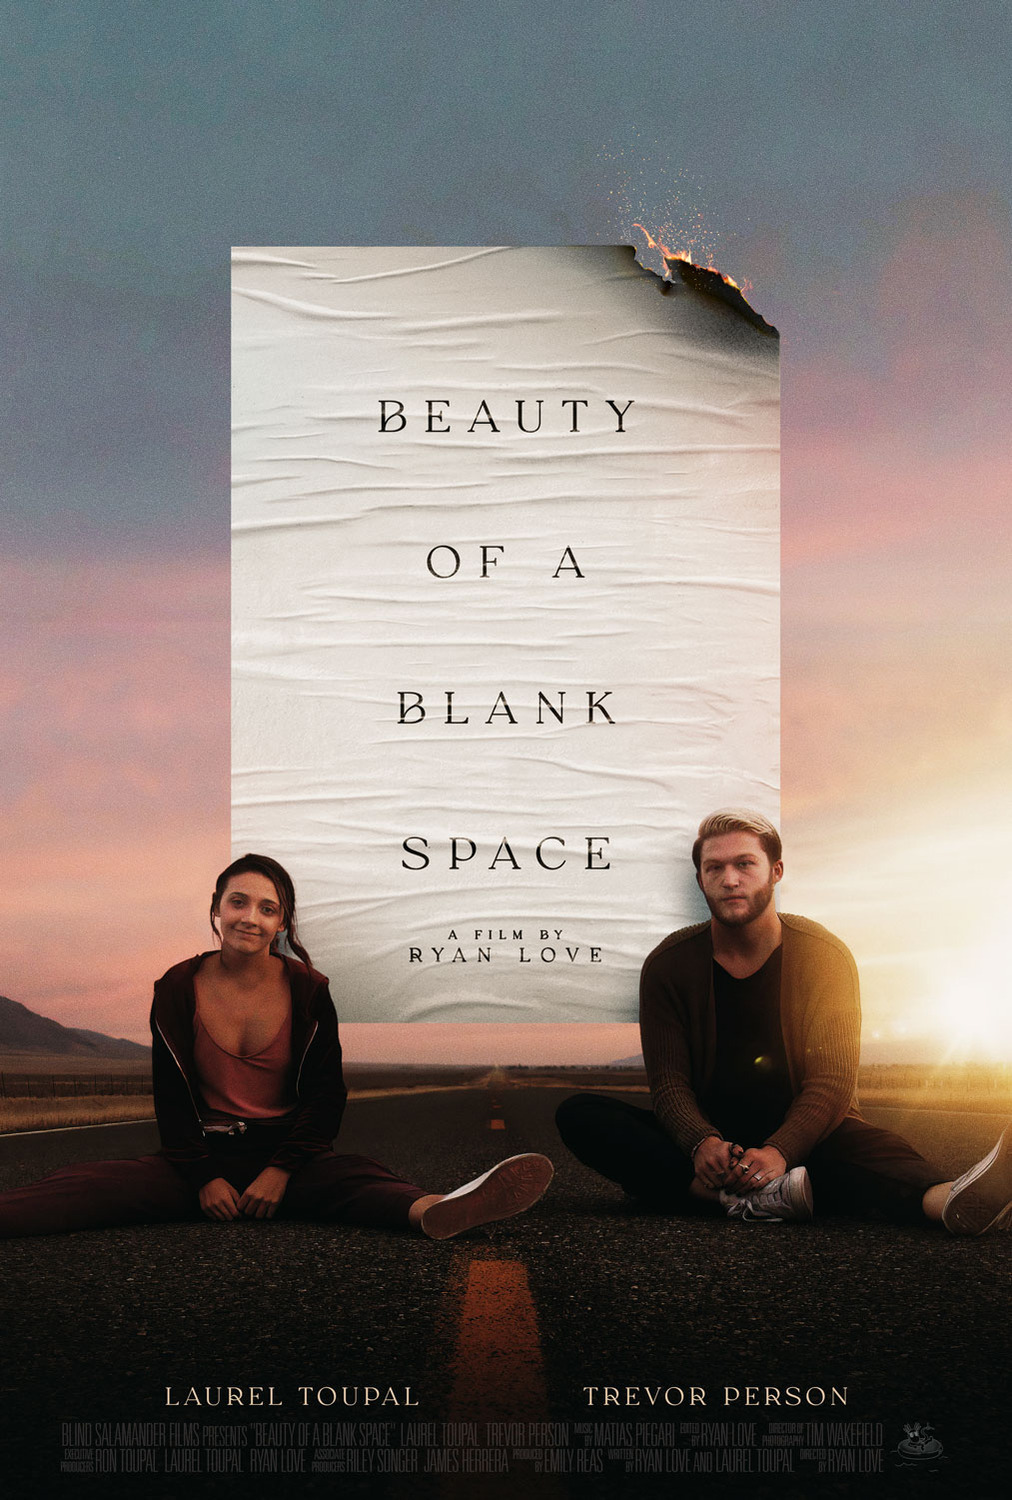 Beauty of a Blank Space Poster Ryan Love Movie Art Film Print Size 24x36 27x40